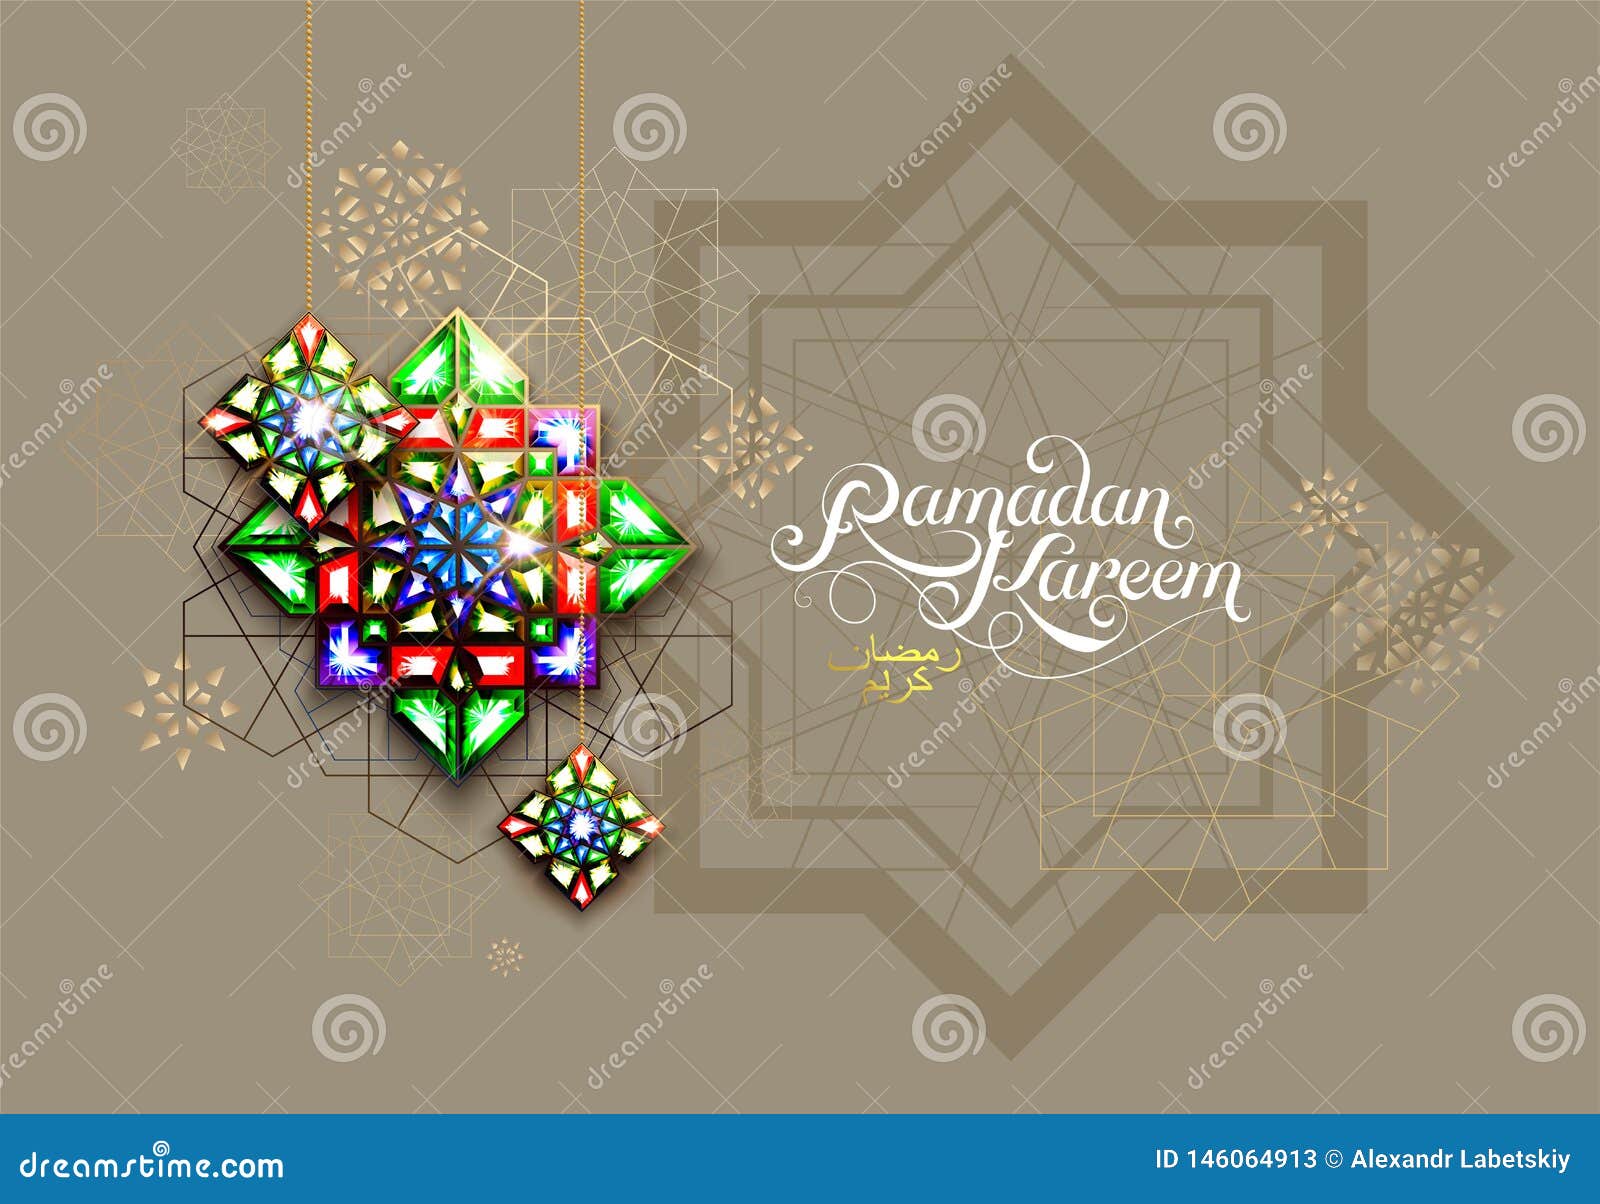 ramadan kareem. abstract girih flower encrusted with color crystals.  . islamic jewelry ornament